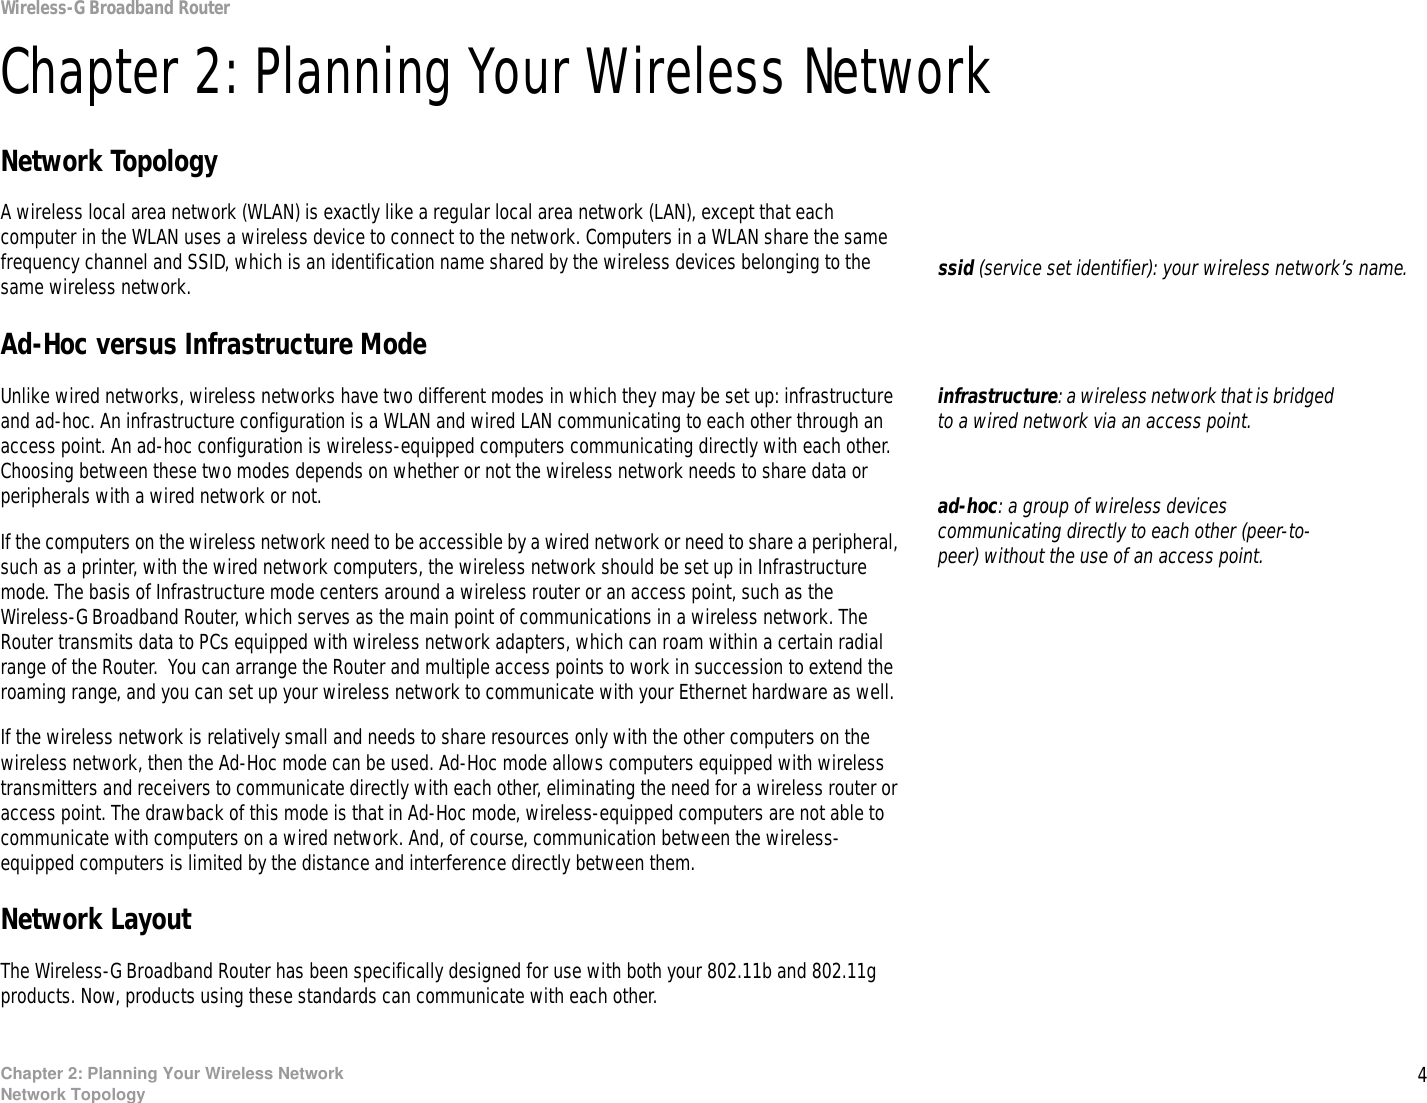 4Chapter 2: Planning Your Wireless NetworkNetwork TopologyWireless-G Broadband RouterChapter 2: Planning Your Wireless NetworkNetwork TopologyA wireless local area network (WLAN) is exactly like a regular local area network (LAN), except that each computer in the WLAN uses a wireless device to connect to the network. Computers in a WLAN share the same frequency channel and SSID, which is an identification name shared by the wireless devices belonging to the same wireless network.Ad-Hoc versus Infrastructure ModeUnlike wired networks, wireless networks have two different modes in which they may be set up: infrastructure and ad-hoc. An infrastructure configuration is a WLAN and wired LAN communicating to each other through an access point. An ad-hoc configuration is wireless-equipped computers communicating directly with each other. Choosing between these two modes depends on whether or not the wireless network needs to share data or peripherals with a wired network or not. If the computers on the wireless network need to be accessible by a wired network or need to share a peripheral, such as a printer, with the wired network computers, the wireless network should be set up in Infrastructure mode. The basis of Infrastructure mode centers around a wireless router or an access point, such as the Wireless-G Broadband Router, which serves as the main point of communications in a wireless network. The Router transmits data to PCs equipped with wireless network adapters, which can roam within a certain radial range of the Router.  You can arrange the Router and multiple access points to work in succession to extend the roaming range, and you can set up your wireless network to communicate with your Ethernet hardware as well. If the wireless network is relatively small and needs to share resources only with the other computers on the wireless network, then the Ad-Hoc mode can be used. Ad-Hoc mode allows computers equipped with wireless transmitters and receivers to communicate directly with each other, eliminating the need for a wireless router or access point. The drawback of this mode is that in Ad-Hoc mode, wireless-equipped computers are not able to communicate with computers on a wired network. And, of course, communication between the wireless-equipped computers is limited by the distance and interference directly between them. Network LayoutThe Wireless-G Broadband Router has been specifically designed for use with both your 802.11b and 802.11g products. Now, products using these standards can communicate with each other.infrastructure: a wireless network that is bridged to a wired network via an access point.ssid (service set identifier): your wireless network’s name.ad-hoc: a group of wireless devices communicating directly to each other (peer-to-peer) without the use of an access point.